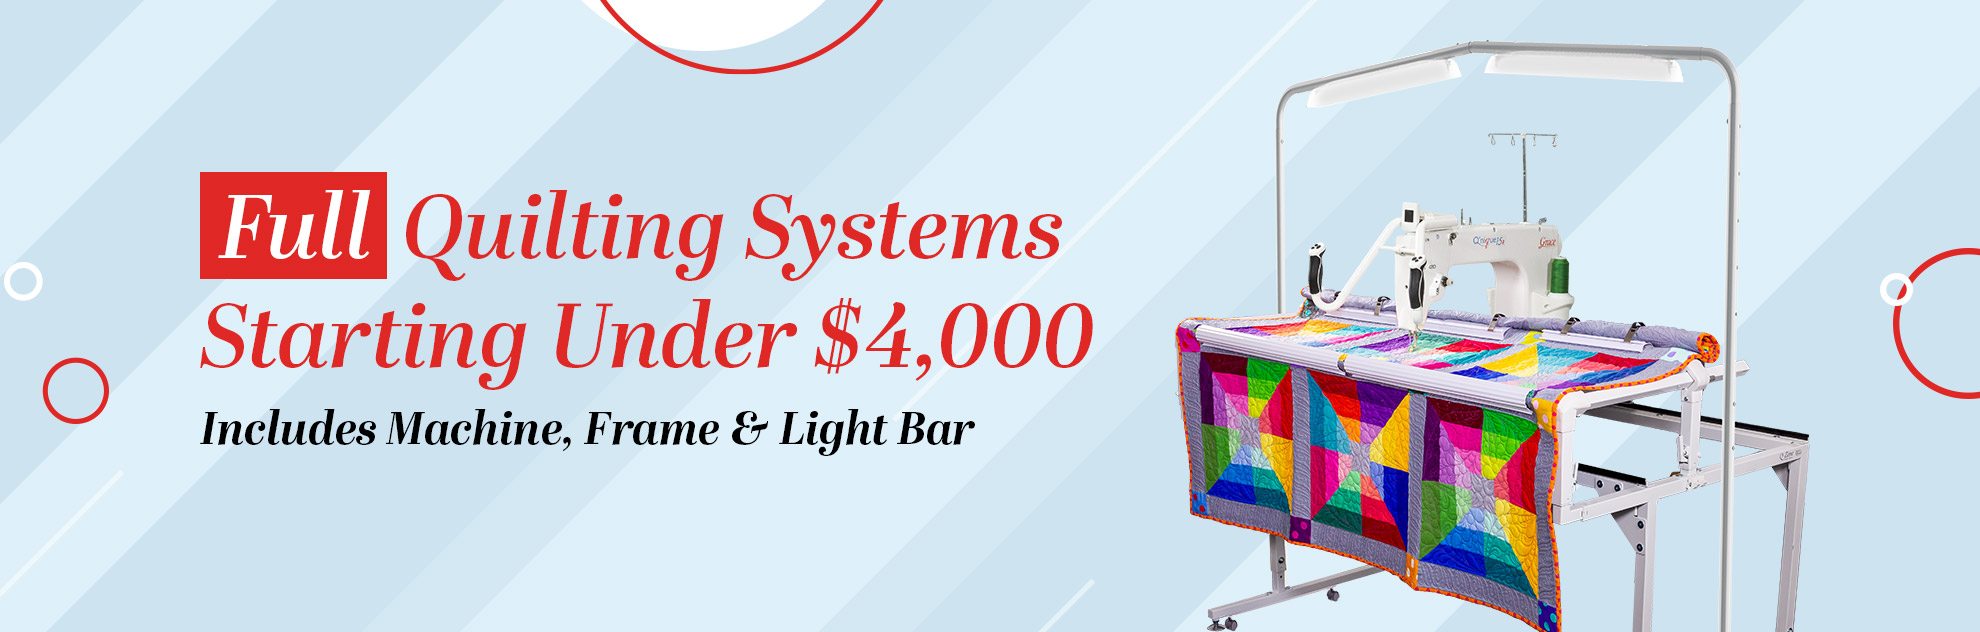 Full Quilting Systems Starting Under $4000